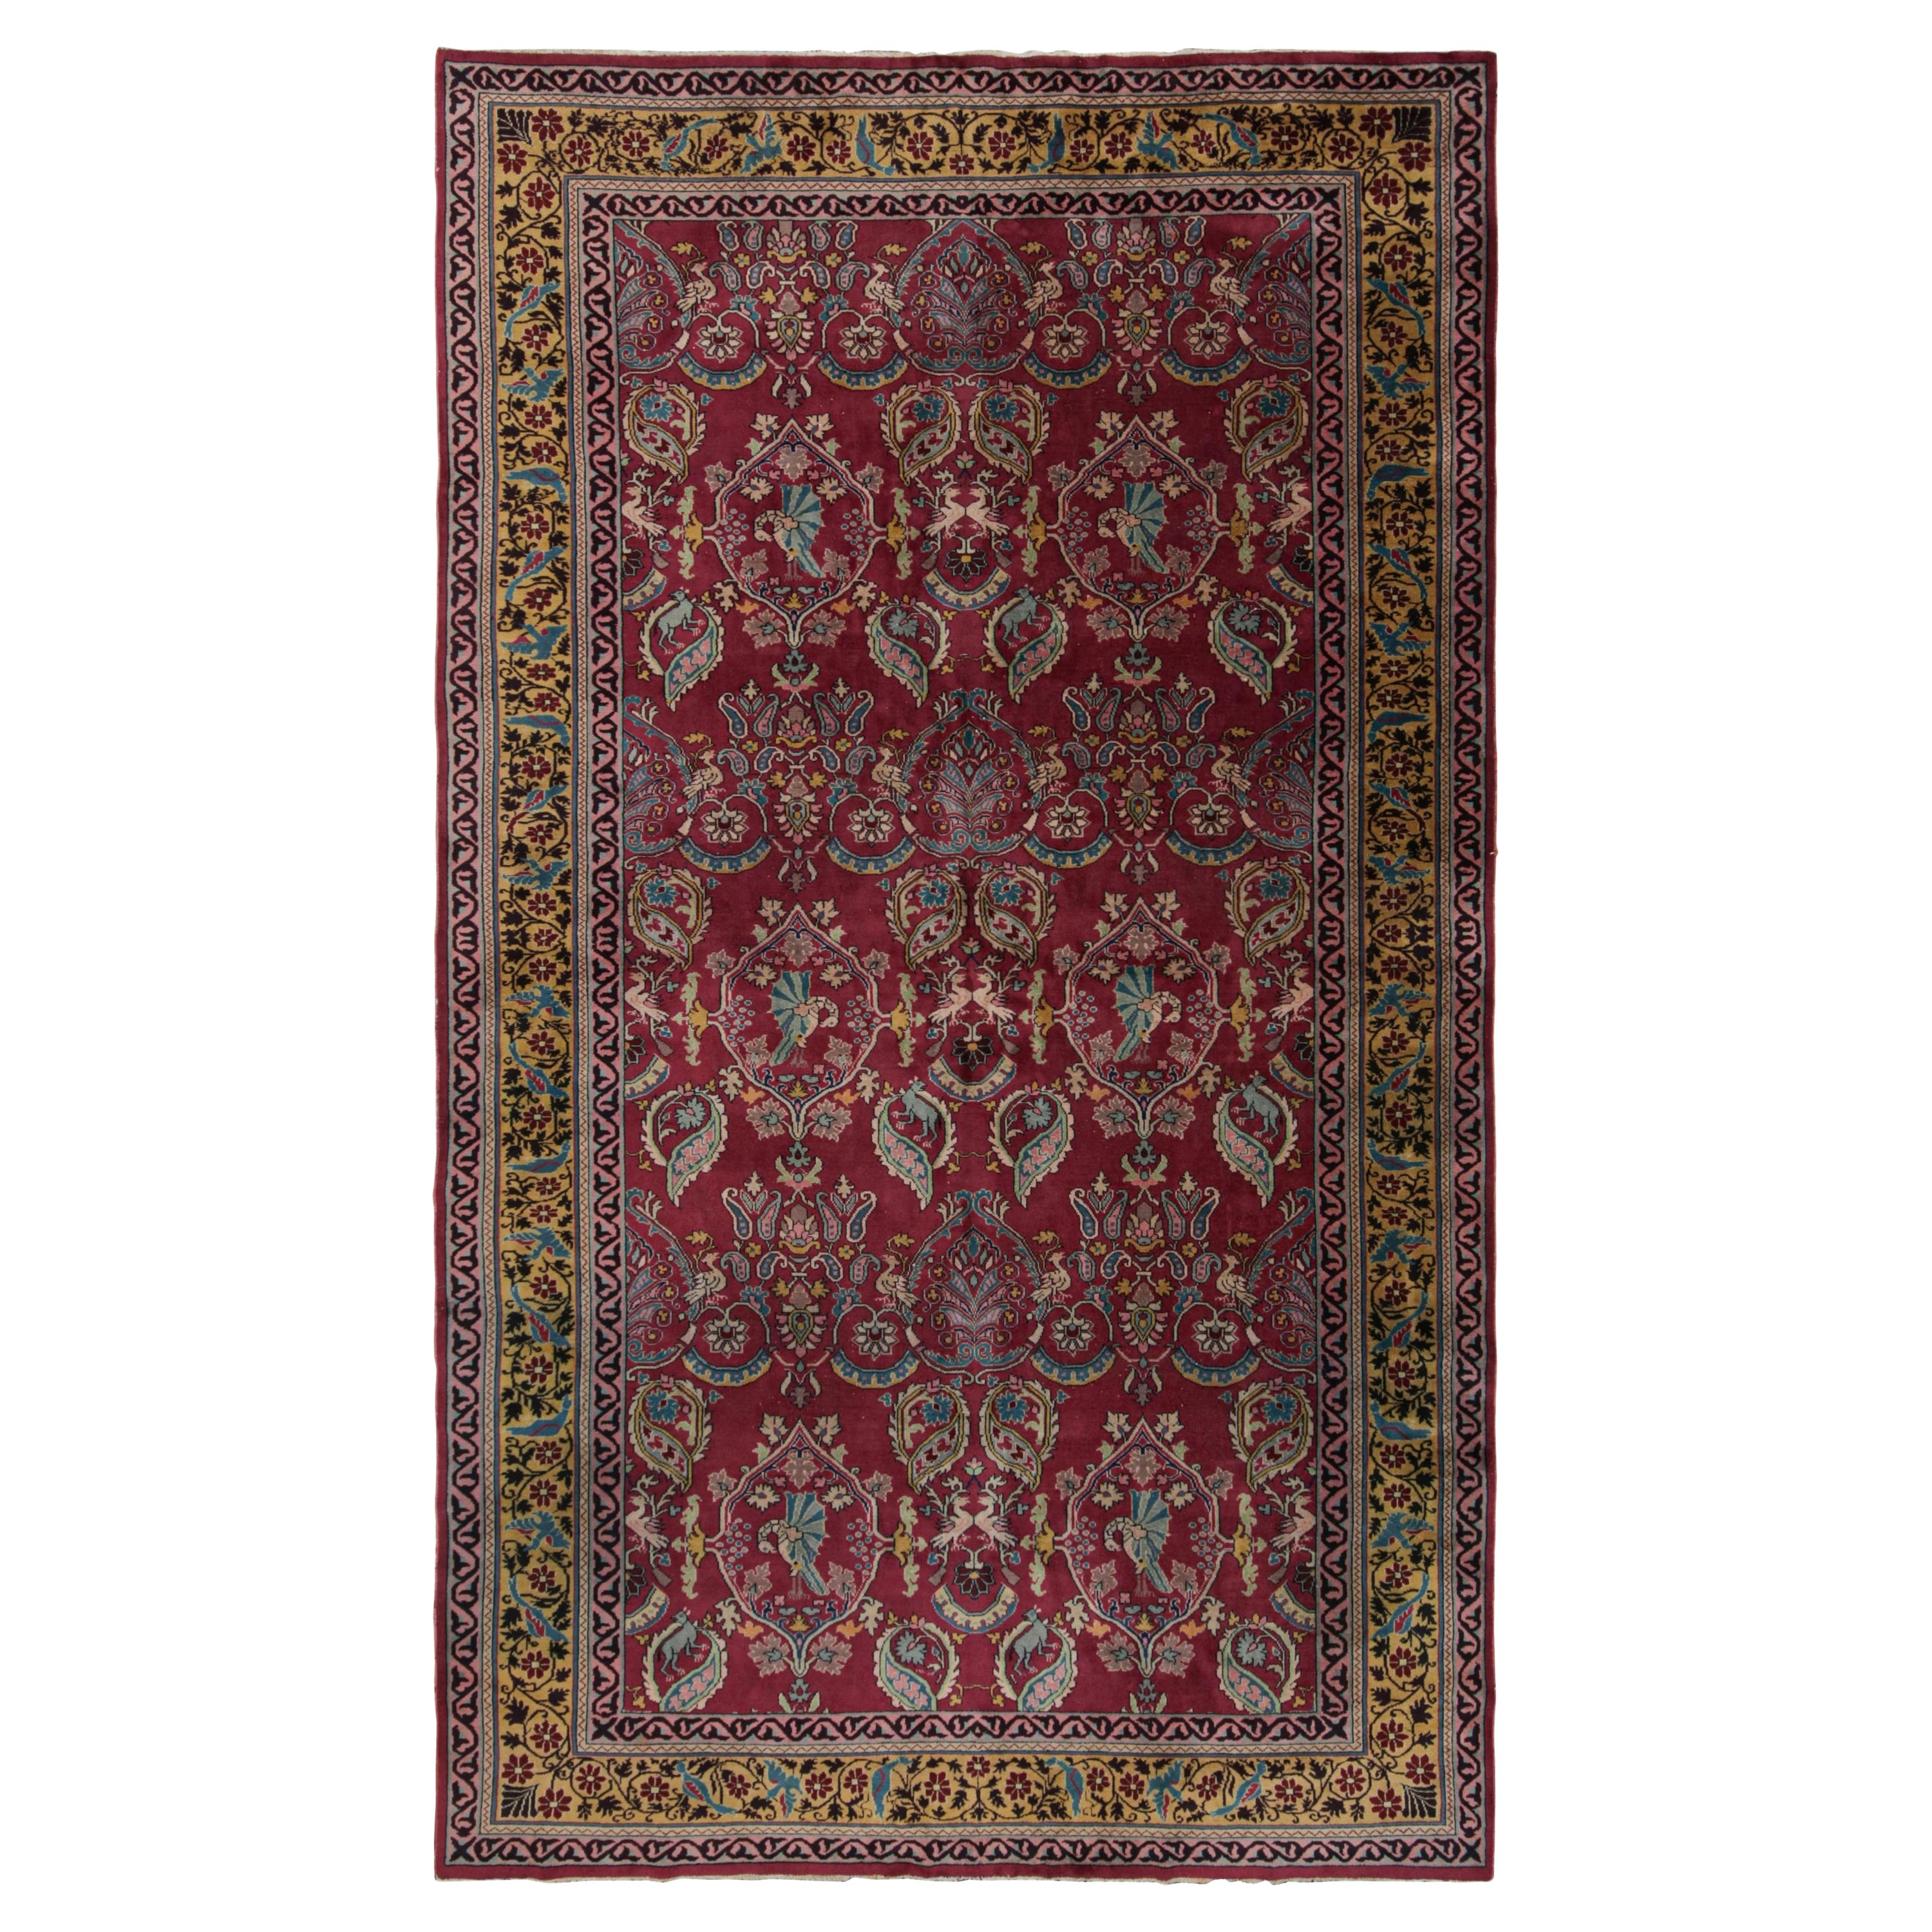 Antique Indian Rug in Burgundy and Gold with Floral Patterns